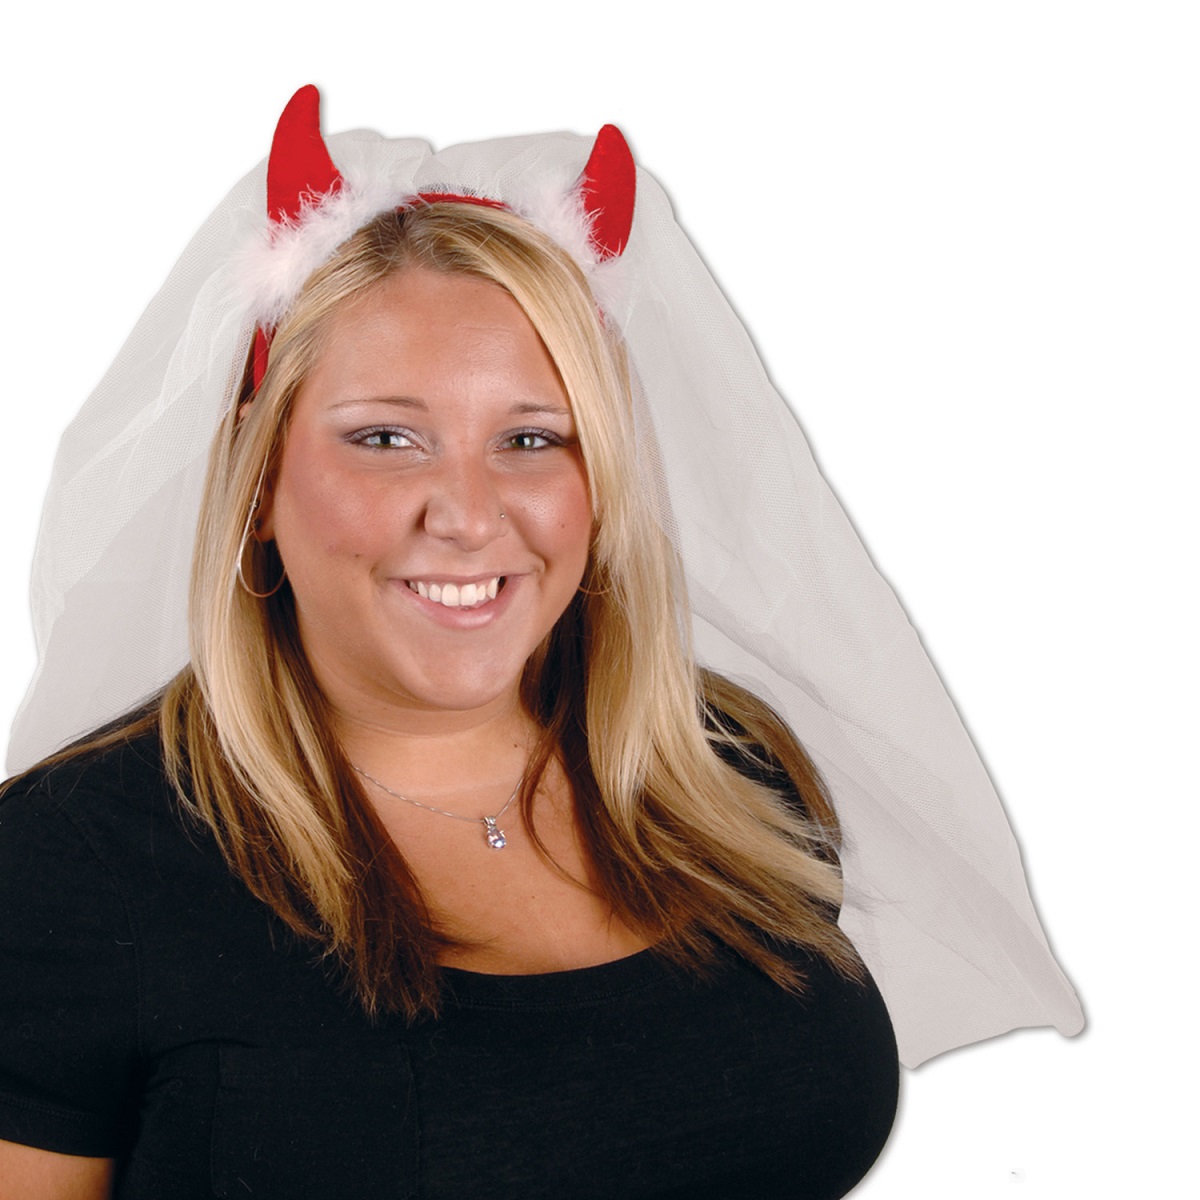 Beistle Club Pack of 12 Red Devil Horns Headband with White Veil Party Favor Costume Accessories - One Size